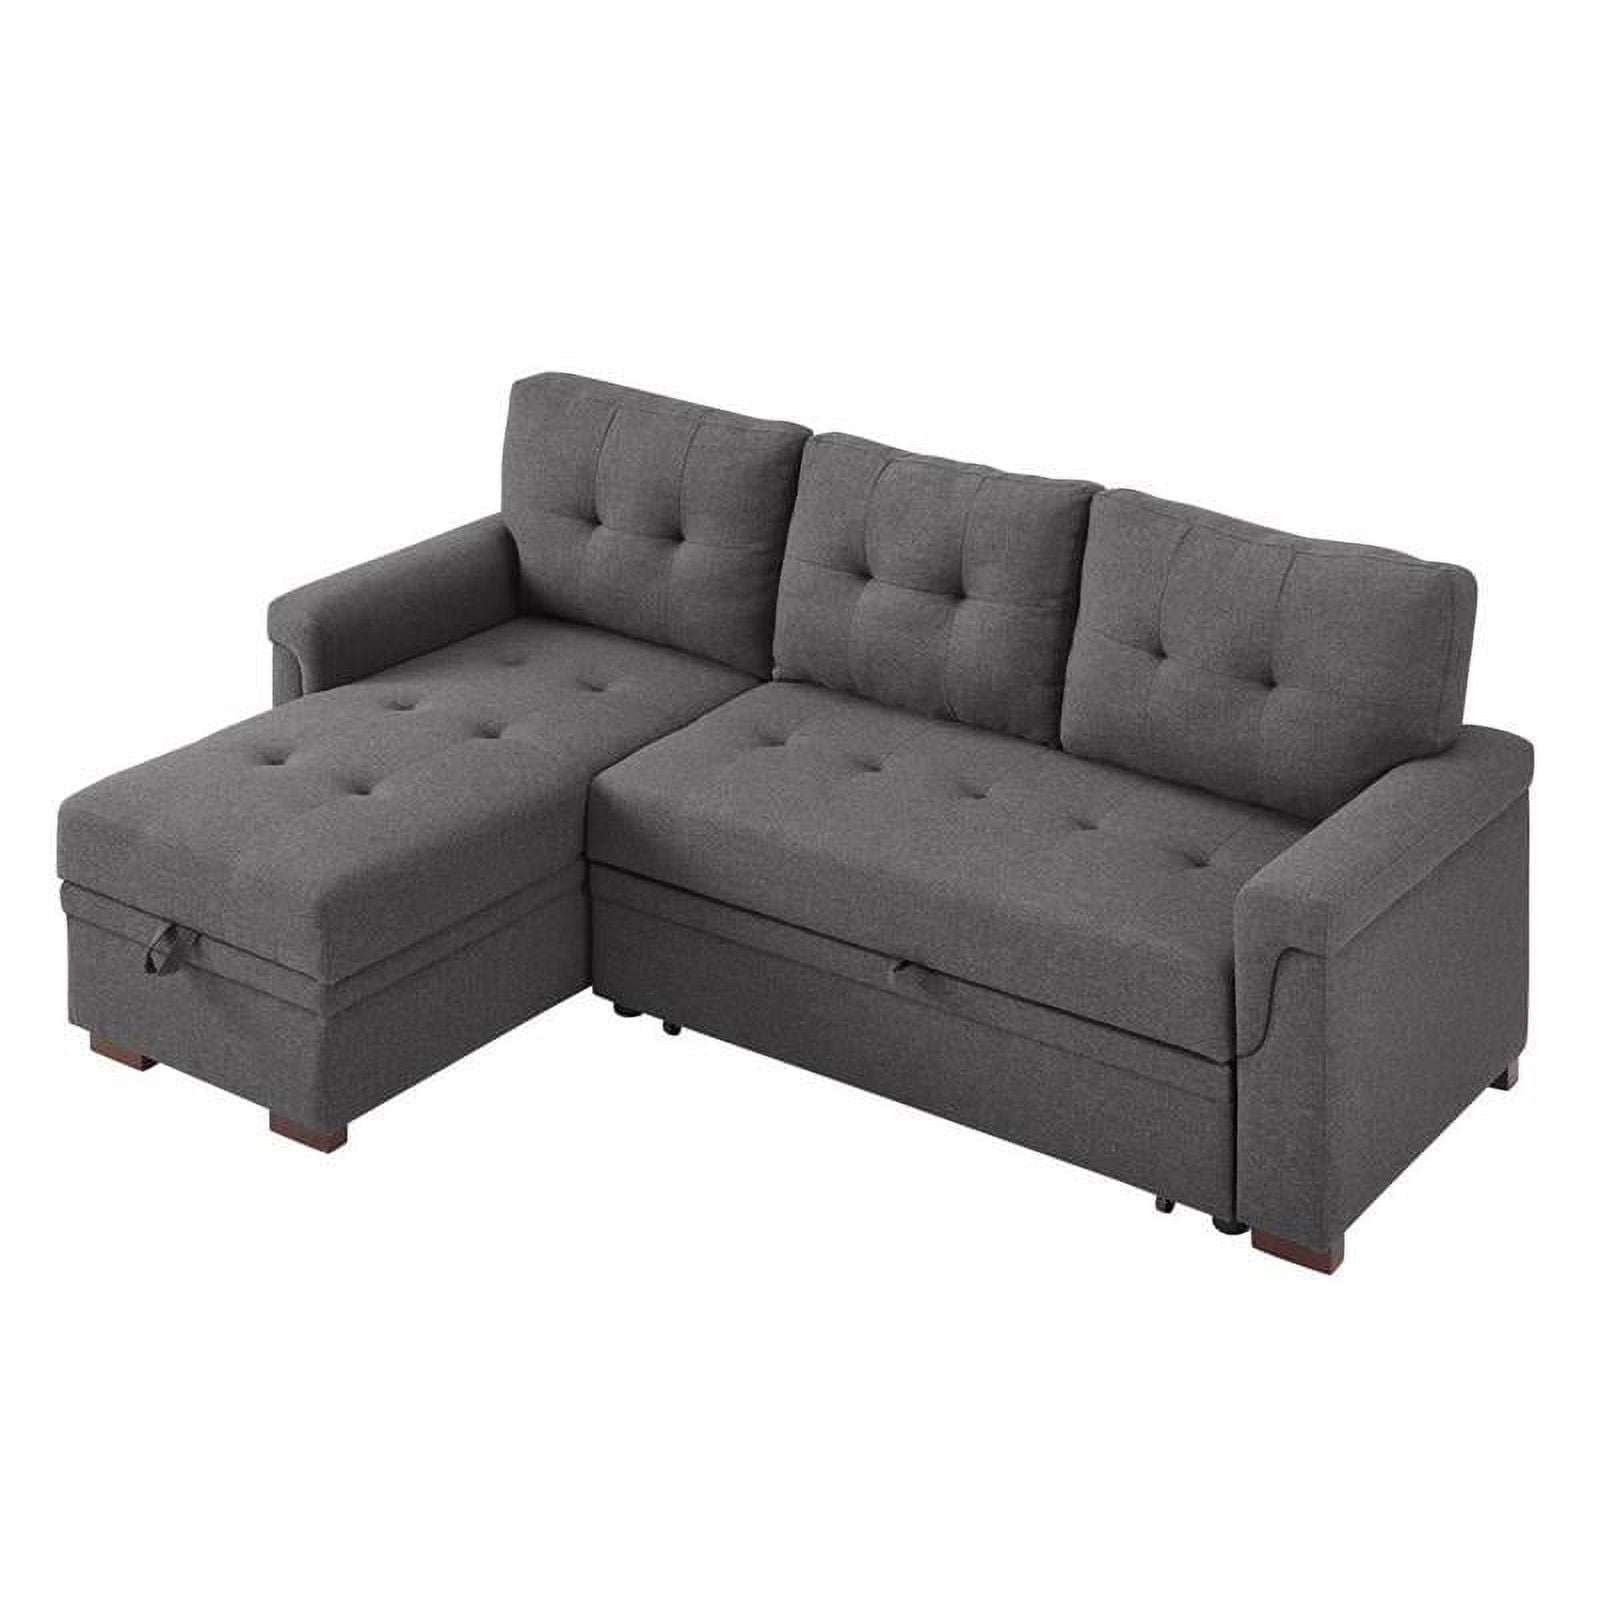 Bowery Hill Fabric Reversible Sectional